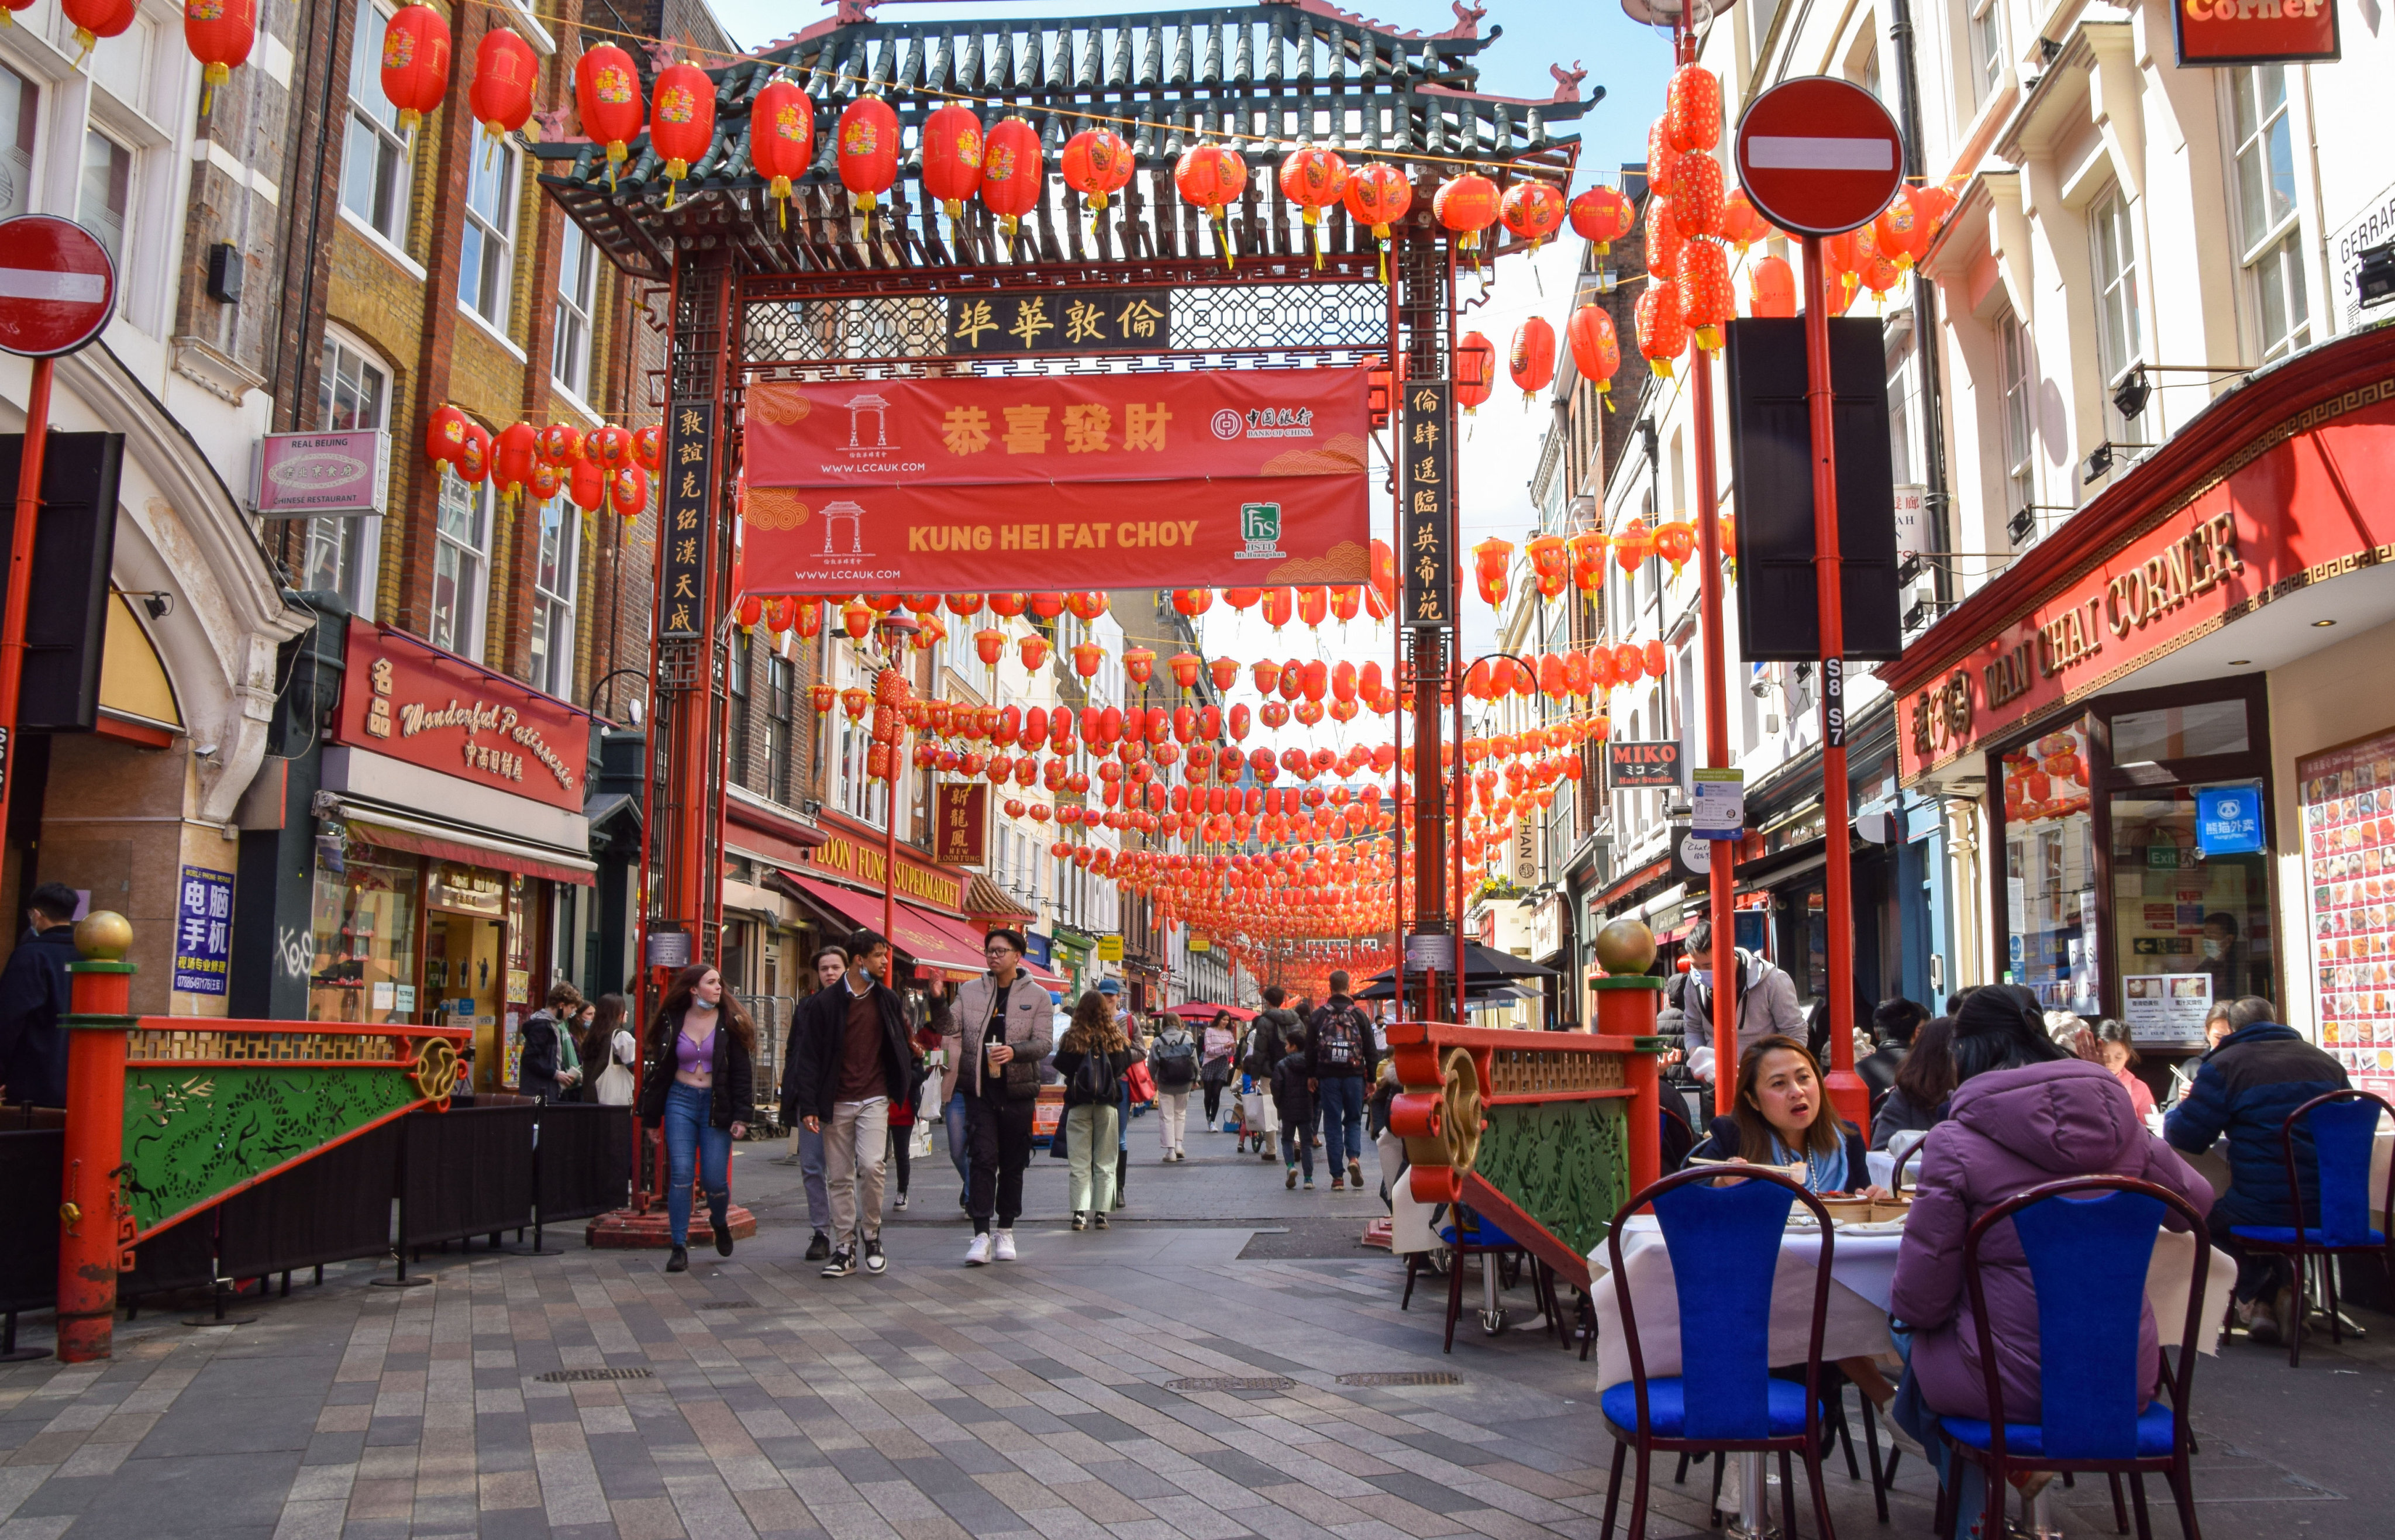 As thousands of Hongkongers leave their homes to head to the UK, they will be sharing Hong Kong’s unique culture. Above: Gerrard Street in Chinatown, London. Photo: Vuk Valcic/Getty Images